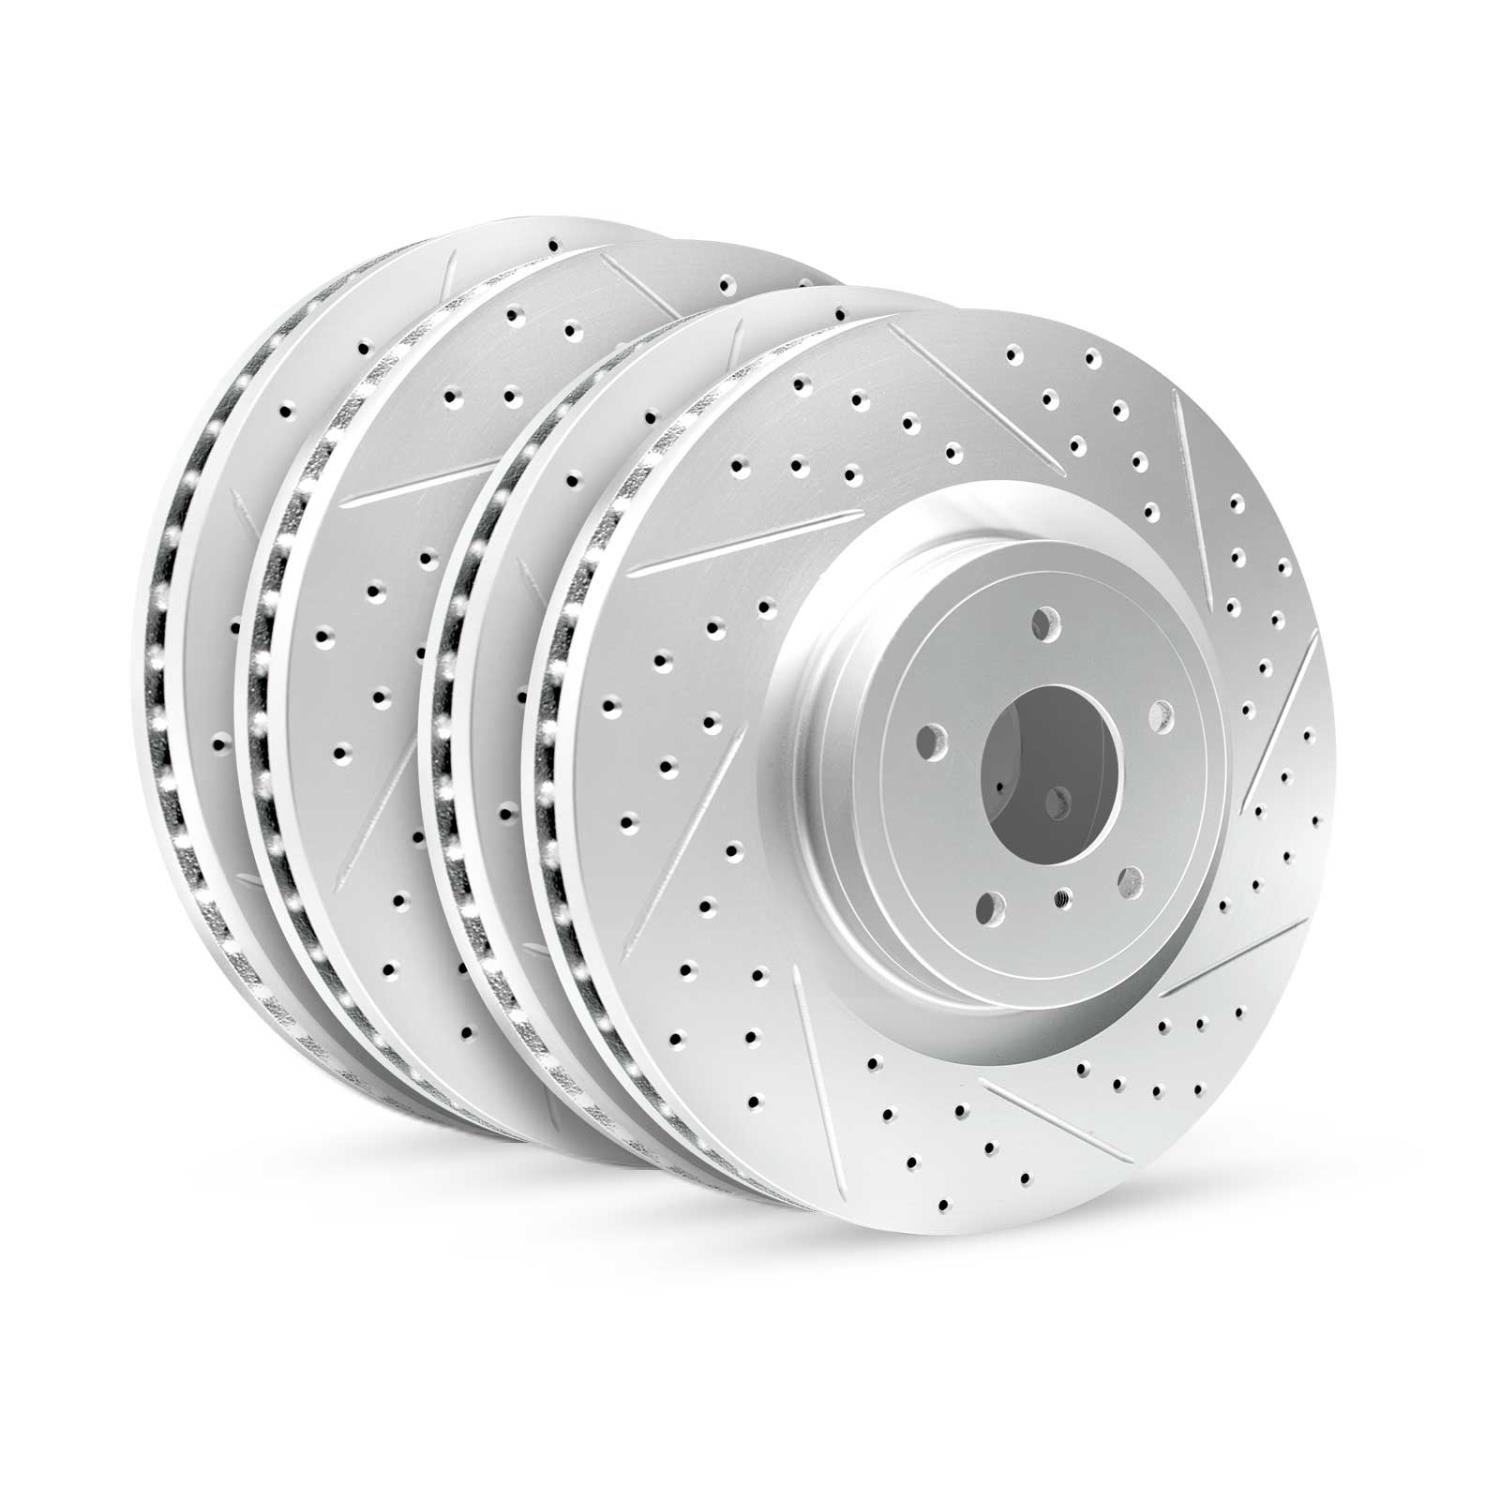 GEO-Carbon Drilled/Slotted Rotors, 2003-2008 Kia/Hyundai/Genesis, Position: Front/Rear